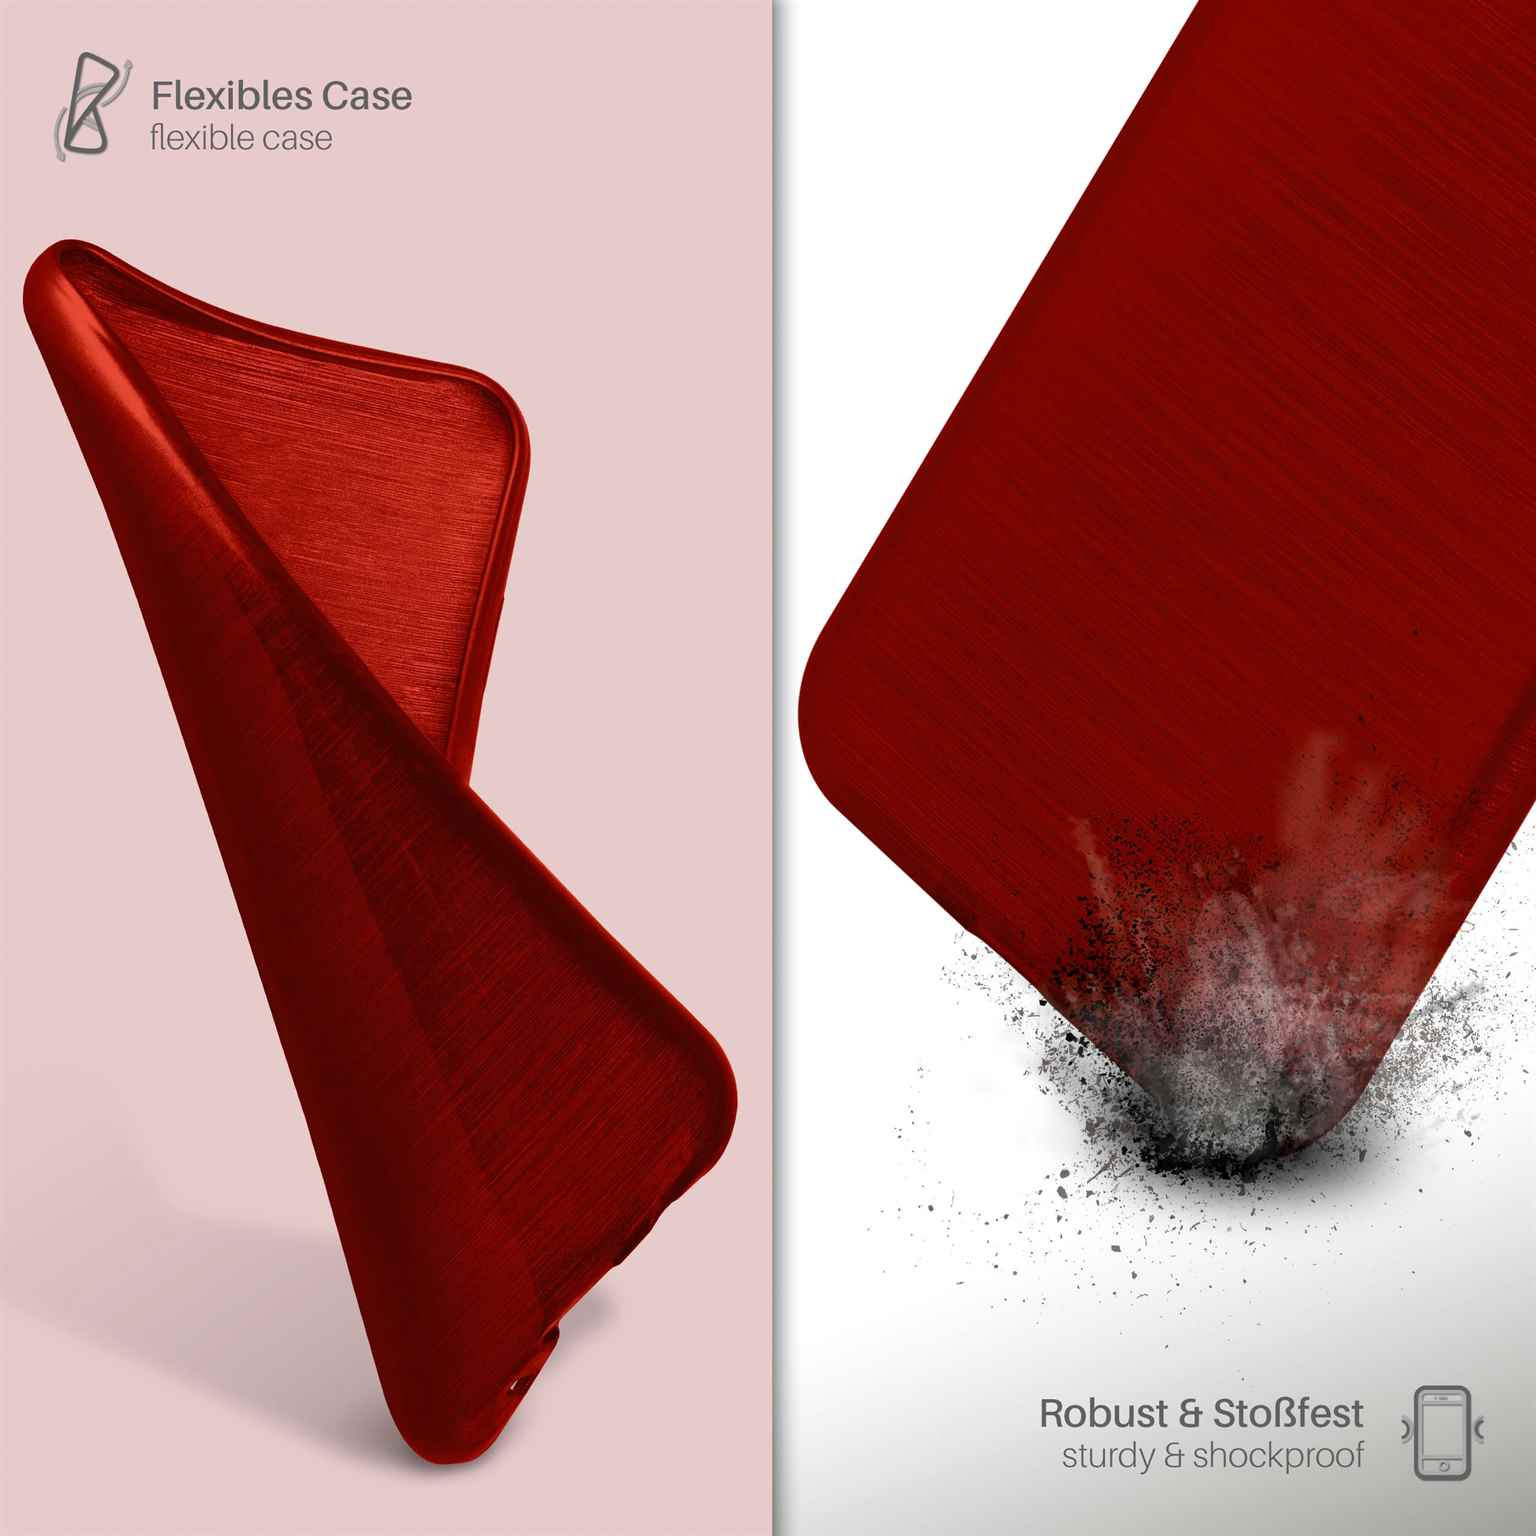 MOEX Brushed Case, Backcover, Apple, iPhone Crimson-Red 7